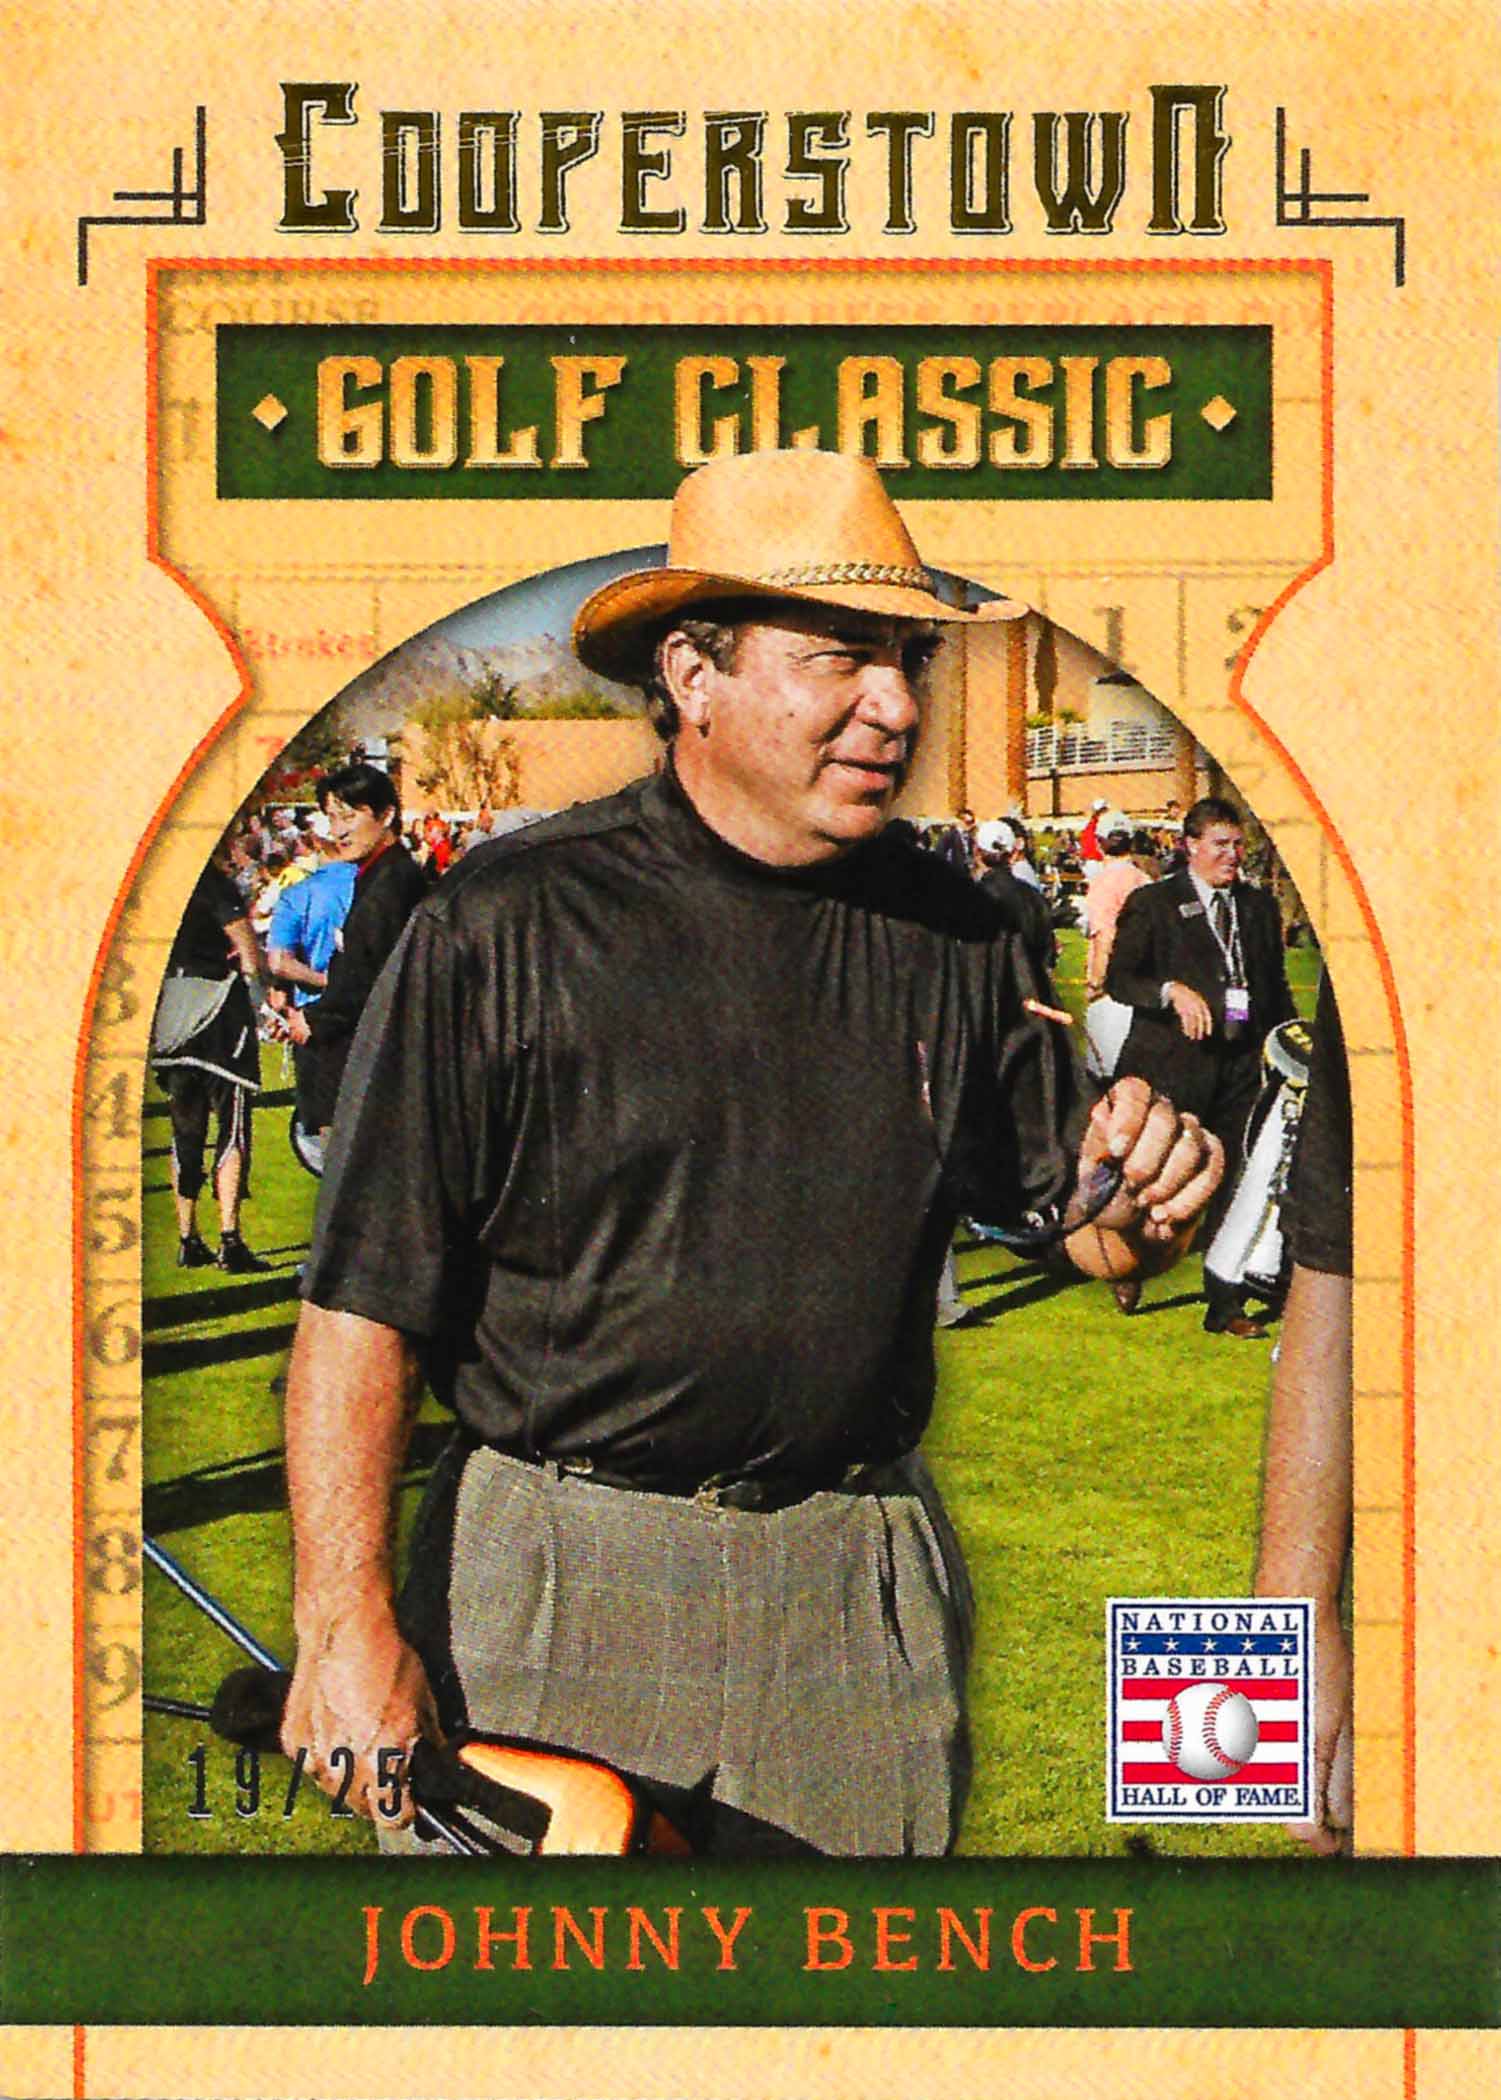 2015 Panini Cooperstown Golf Classic Gold